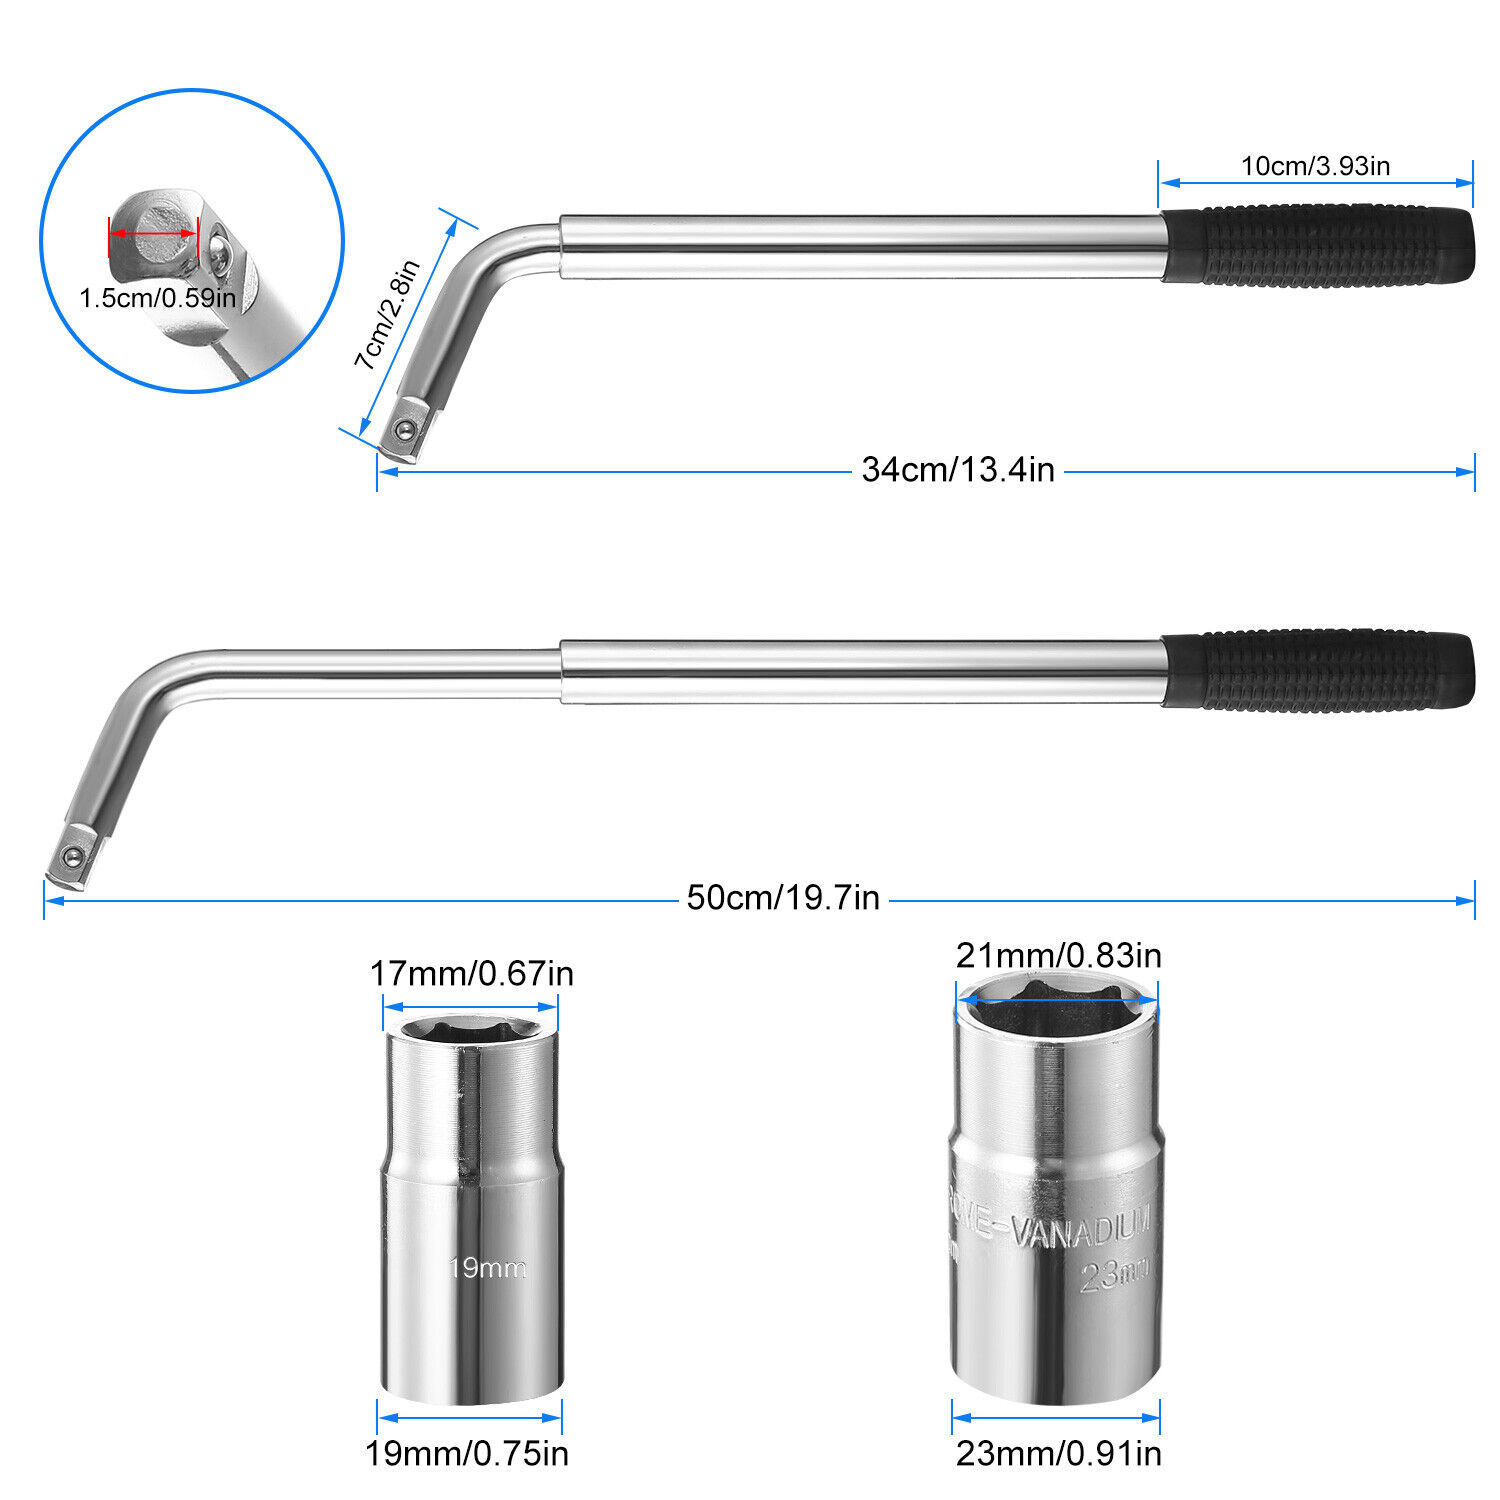 imountek Lug Wrench Telescoping Extendable Tire Nut Wrench 2 Replaceable Standard Sockets